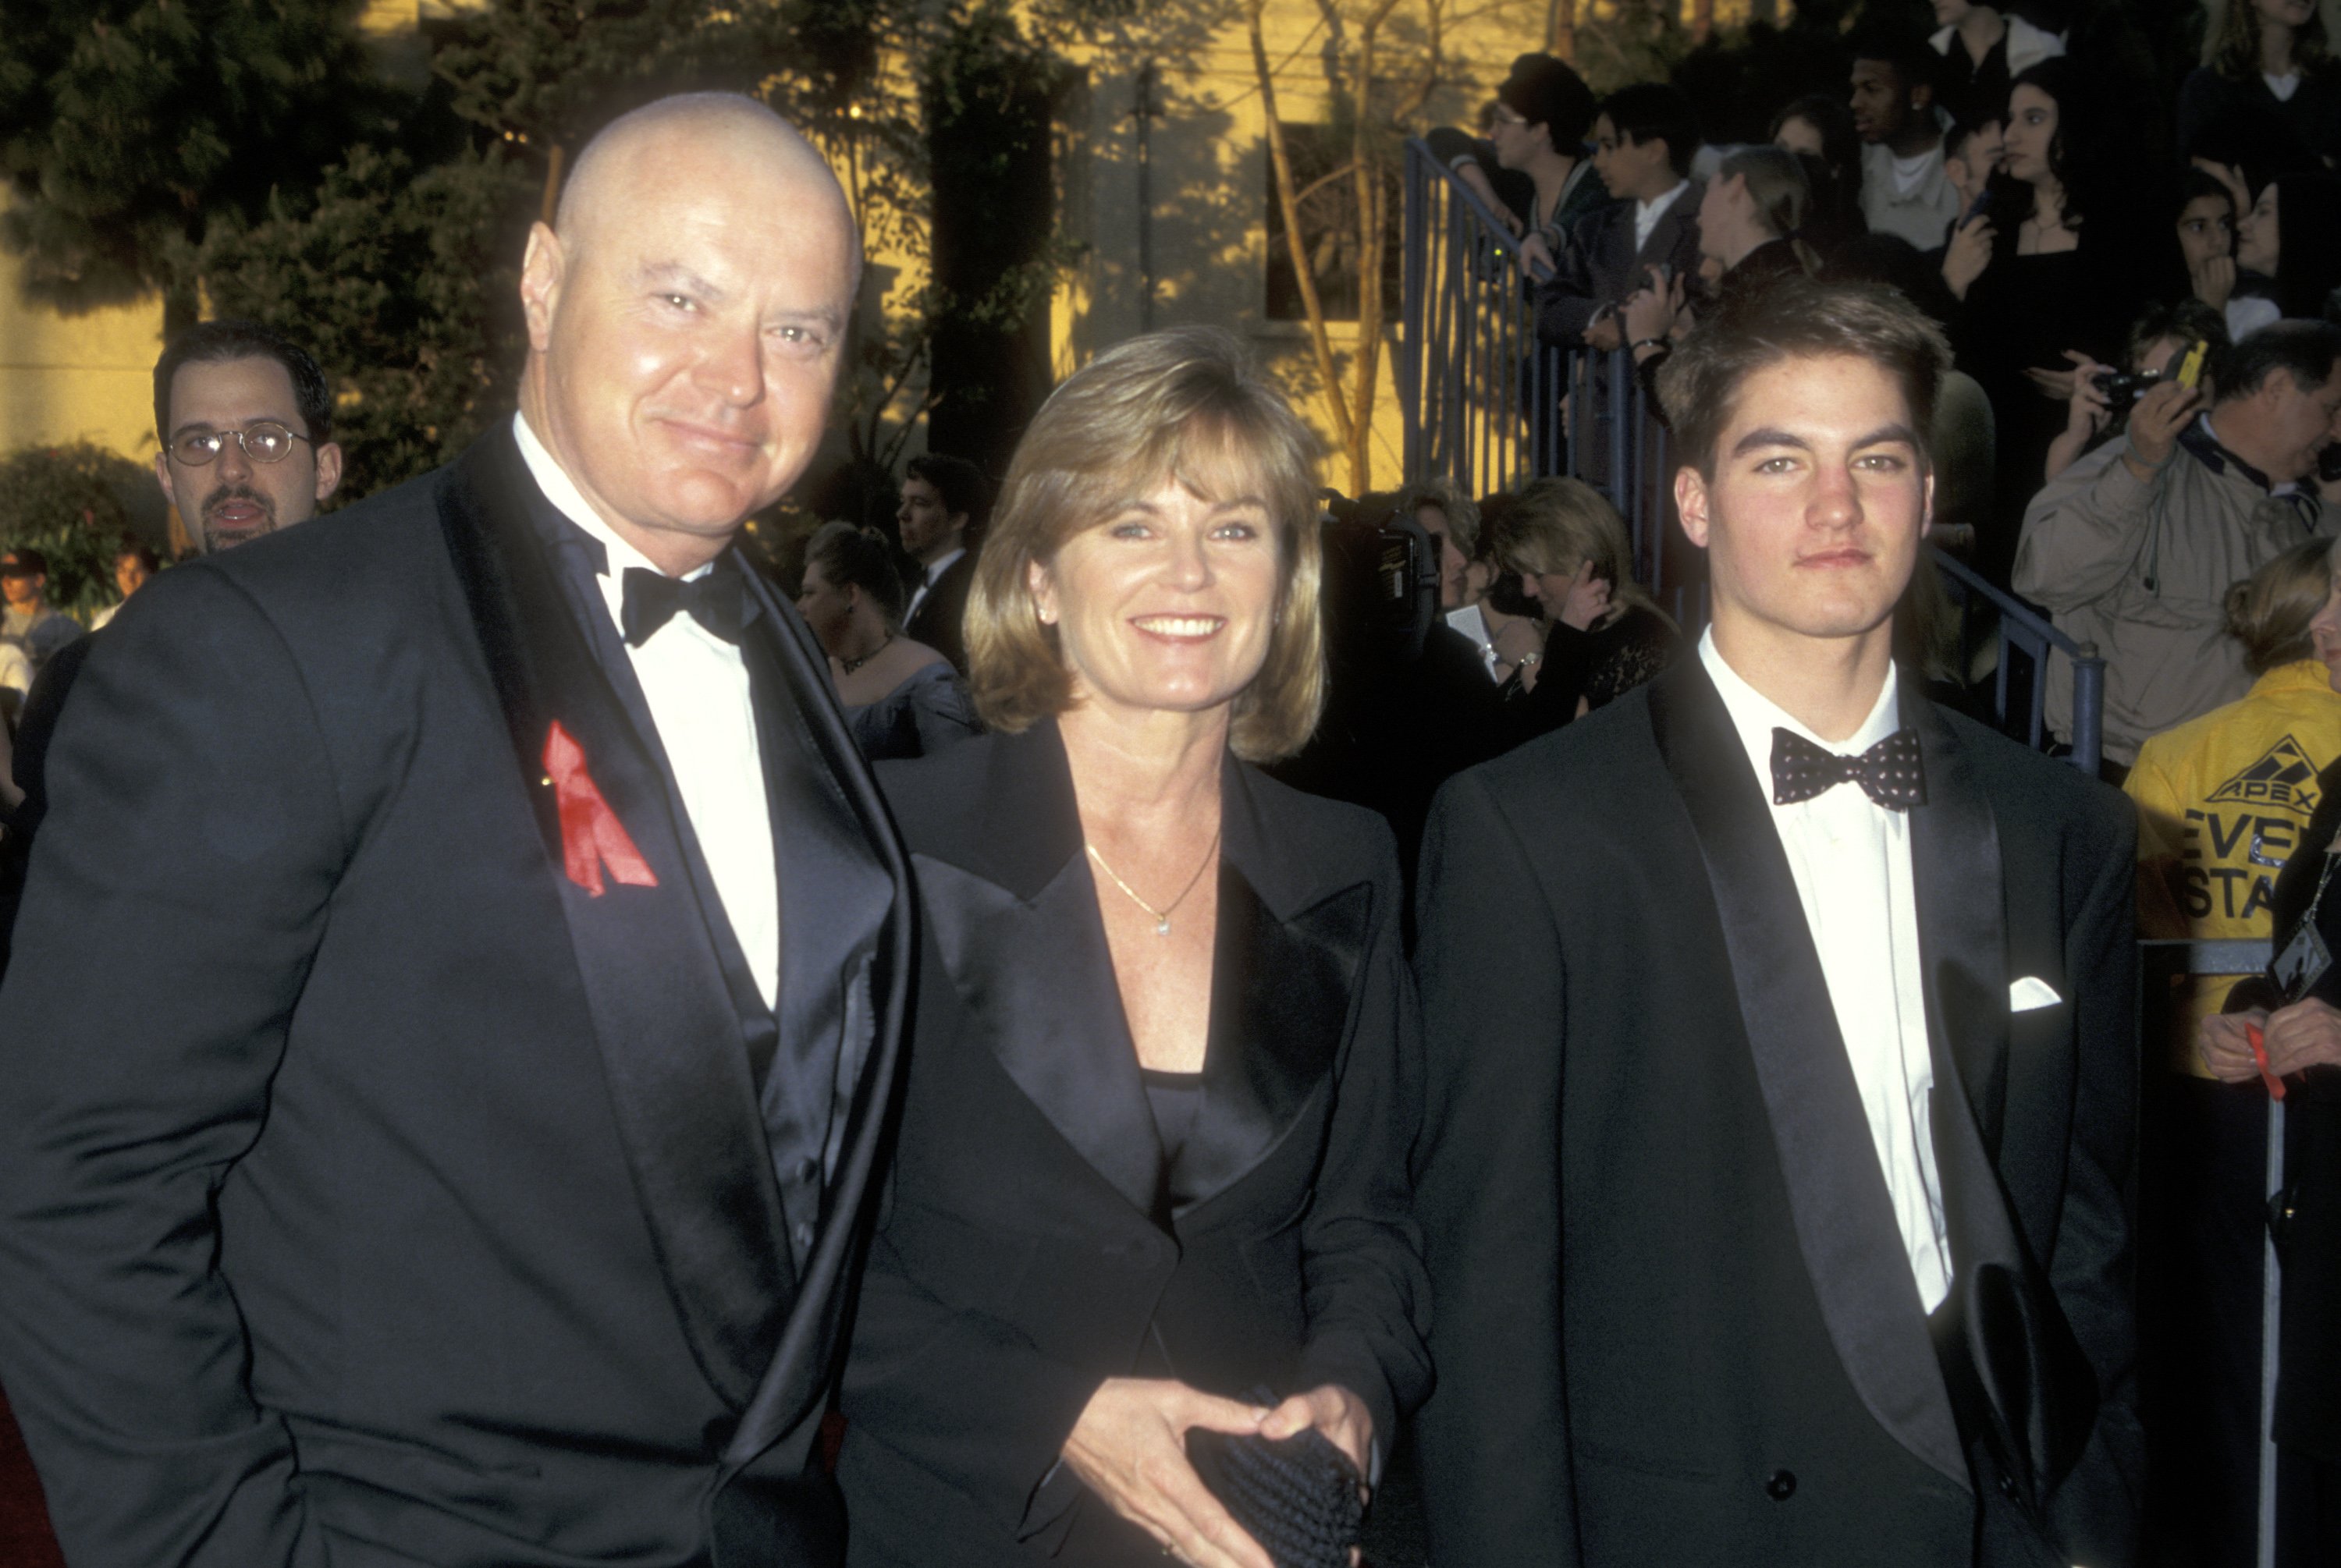 Robert Urich, wife Heather Menzies and son Ryan Urich attend the Third Annual Screen Actors Guild Awards on February 23, 1997 |  Source: Getty Images